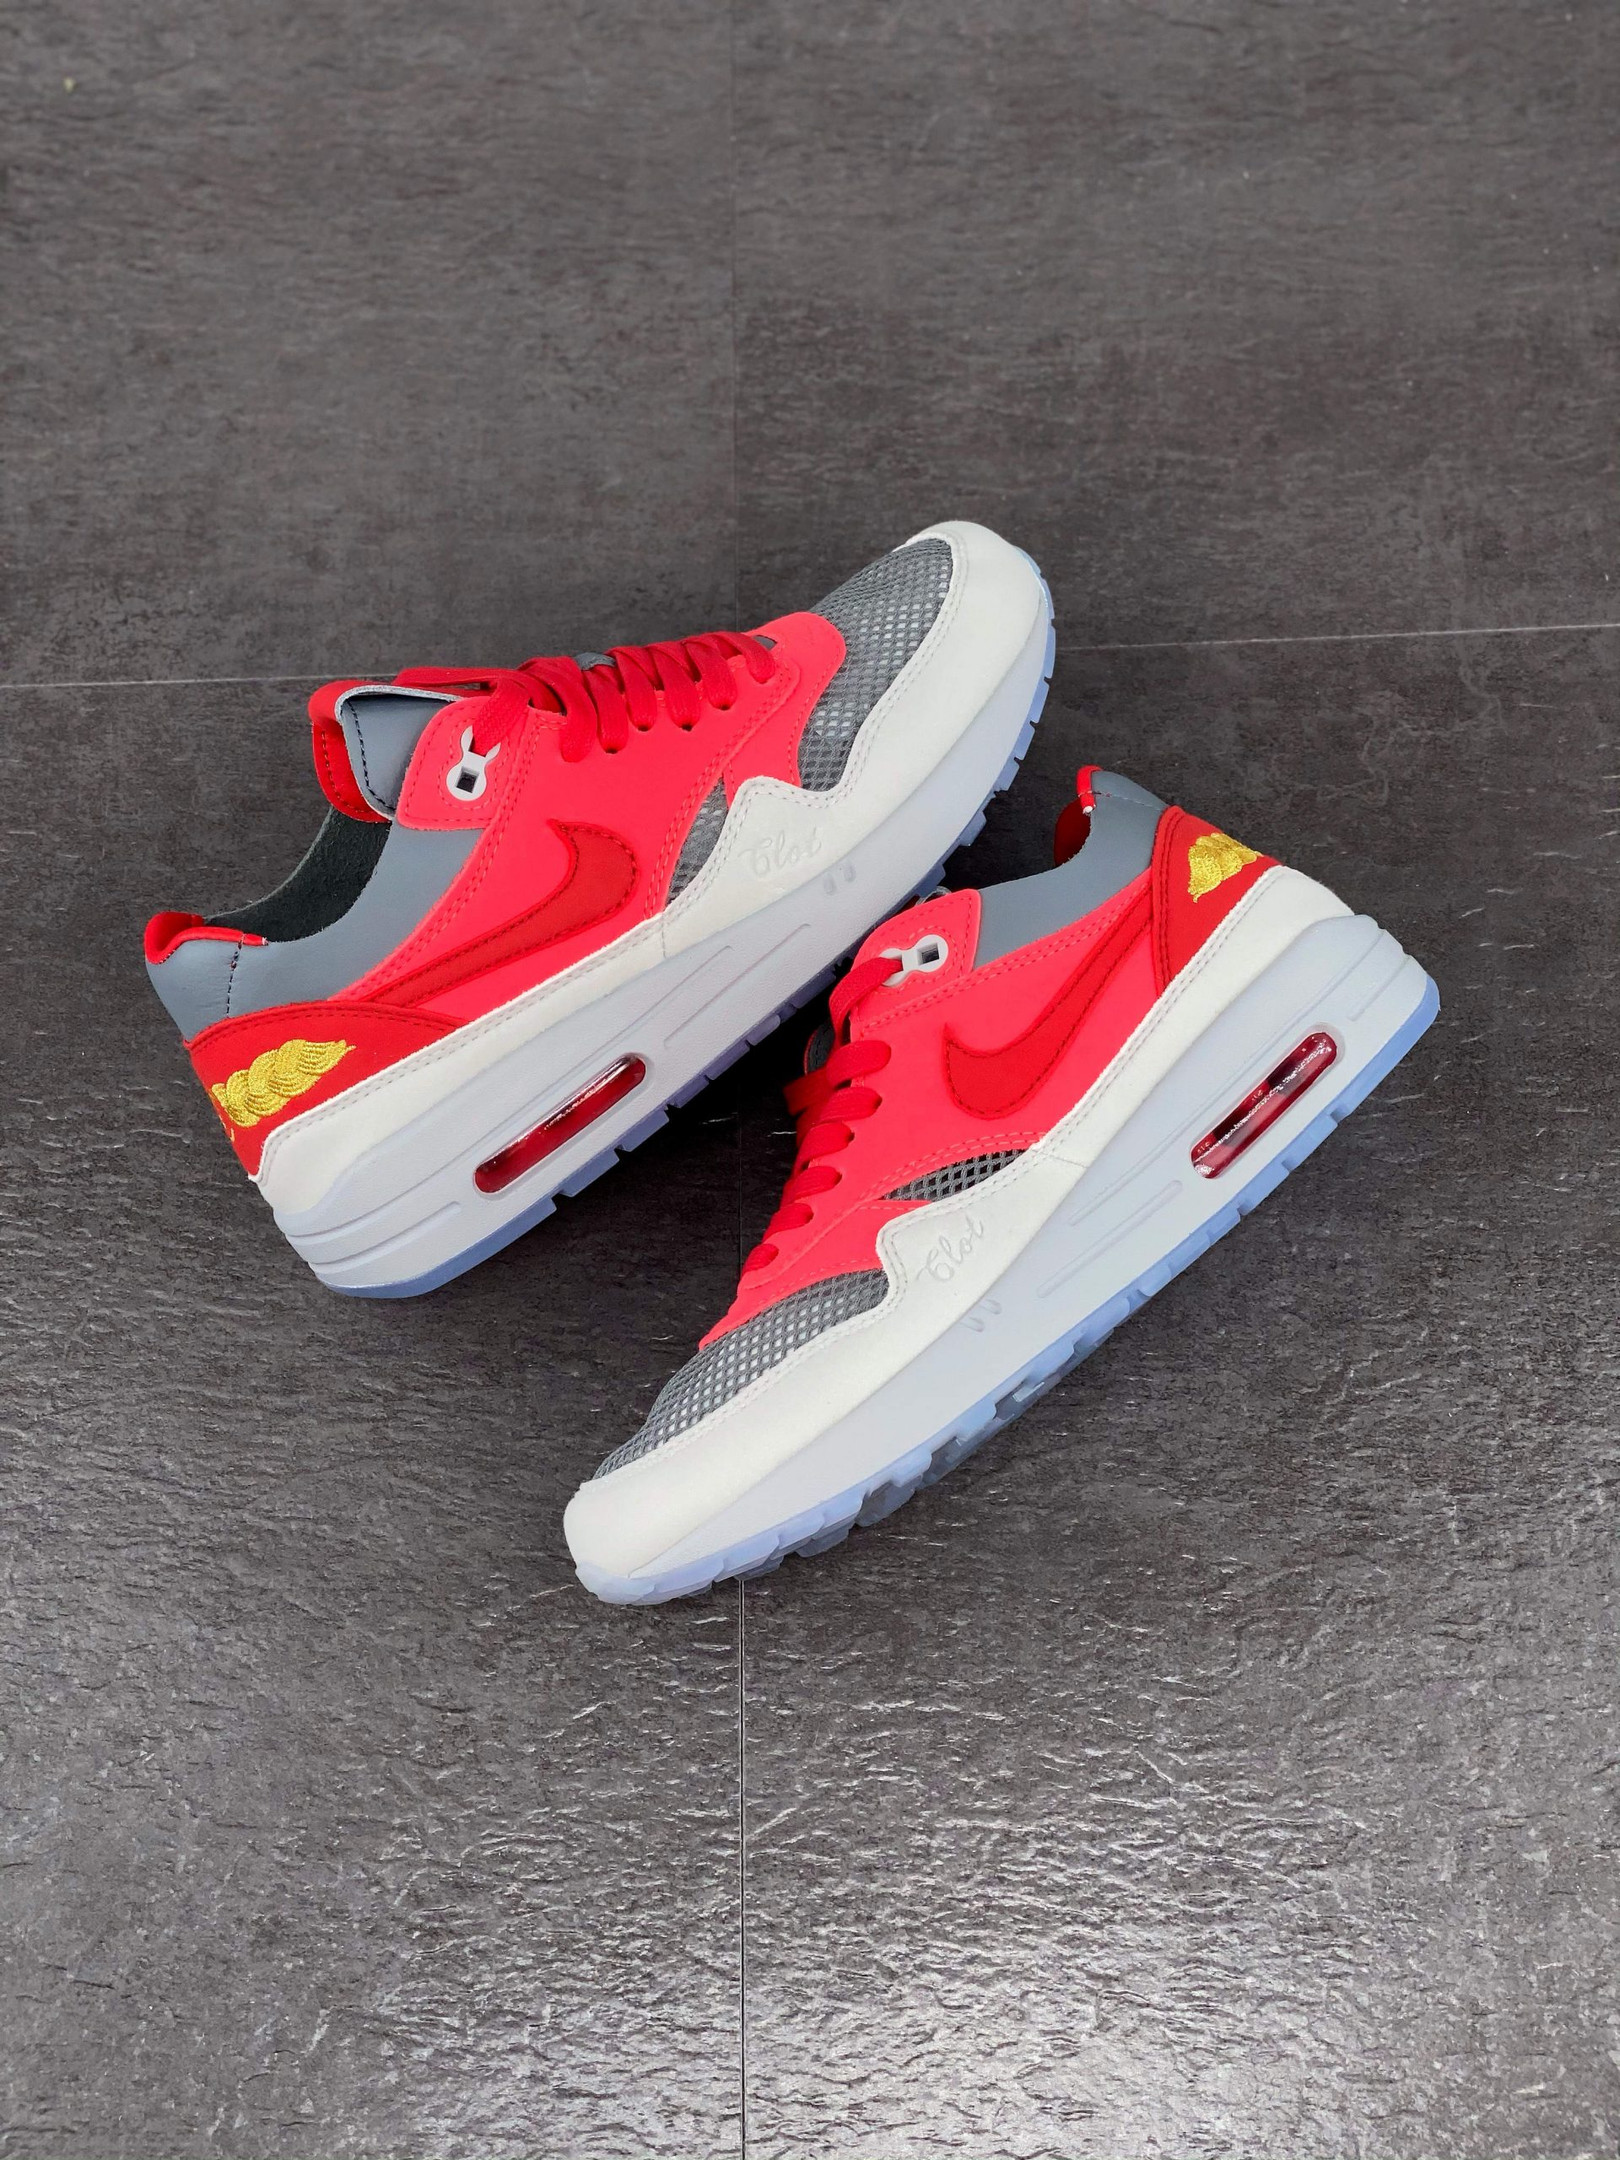 Clot x Nike Air Max 1 K.O.D. Solar Red University Red-Cool Grey For Sale